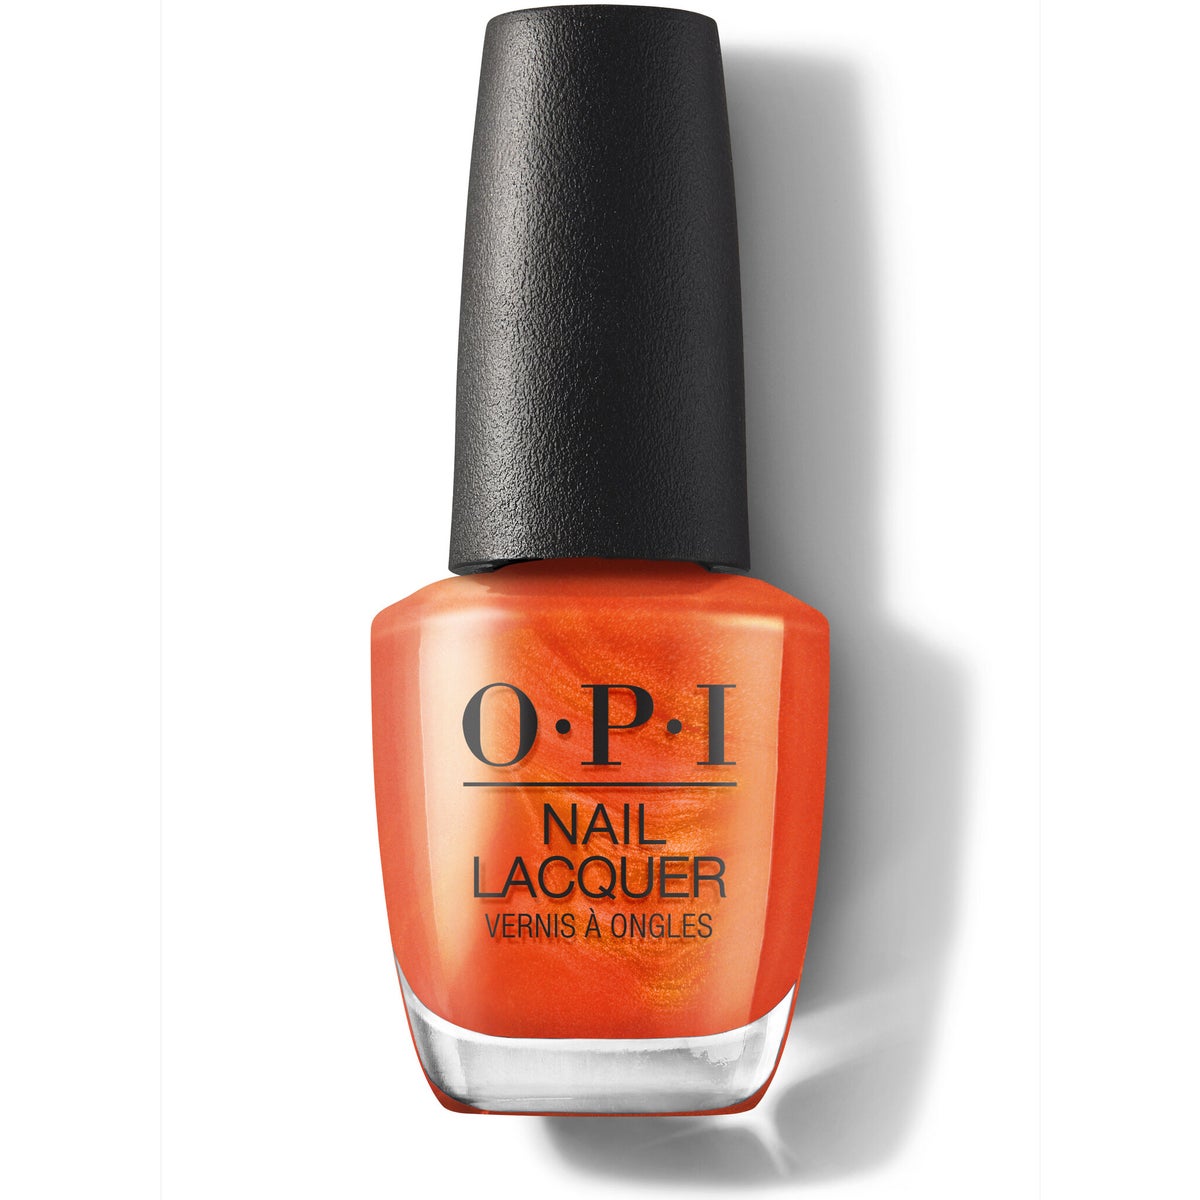 OPI Nail Lacquer - PCH Love Song